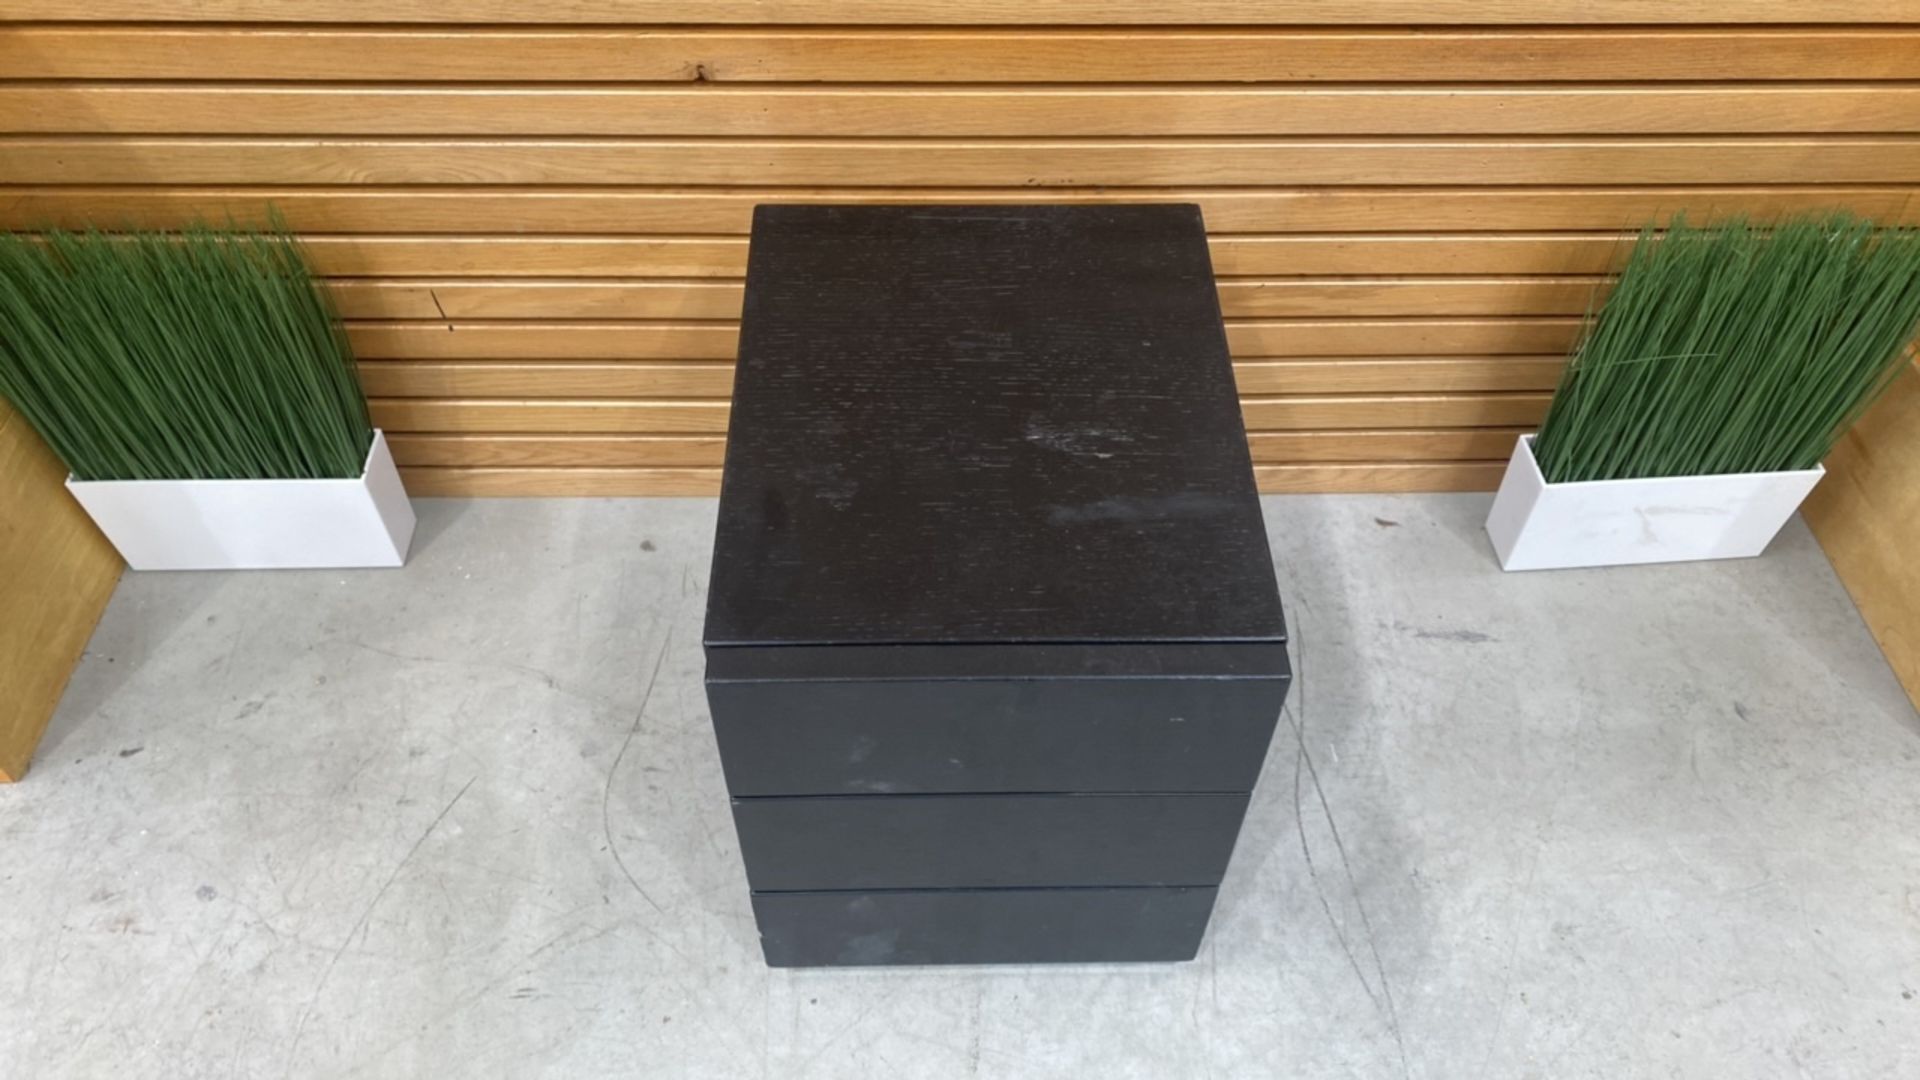 Black Wooden Side Table With 2 Draws X2 - Image 2 of 4